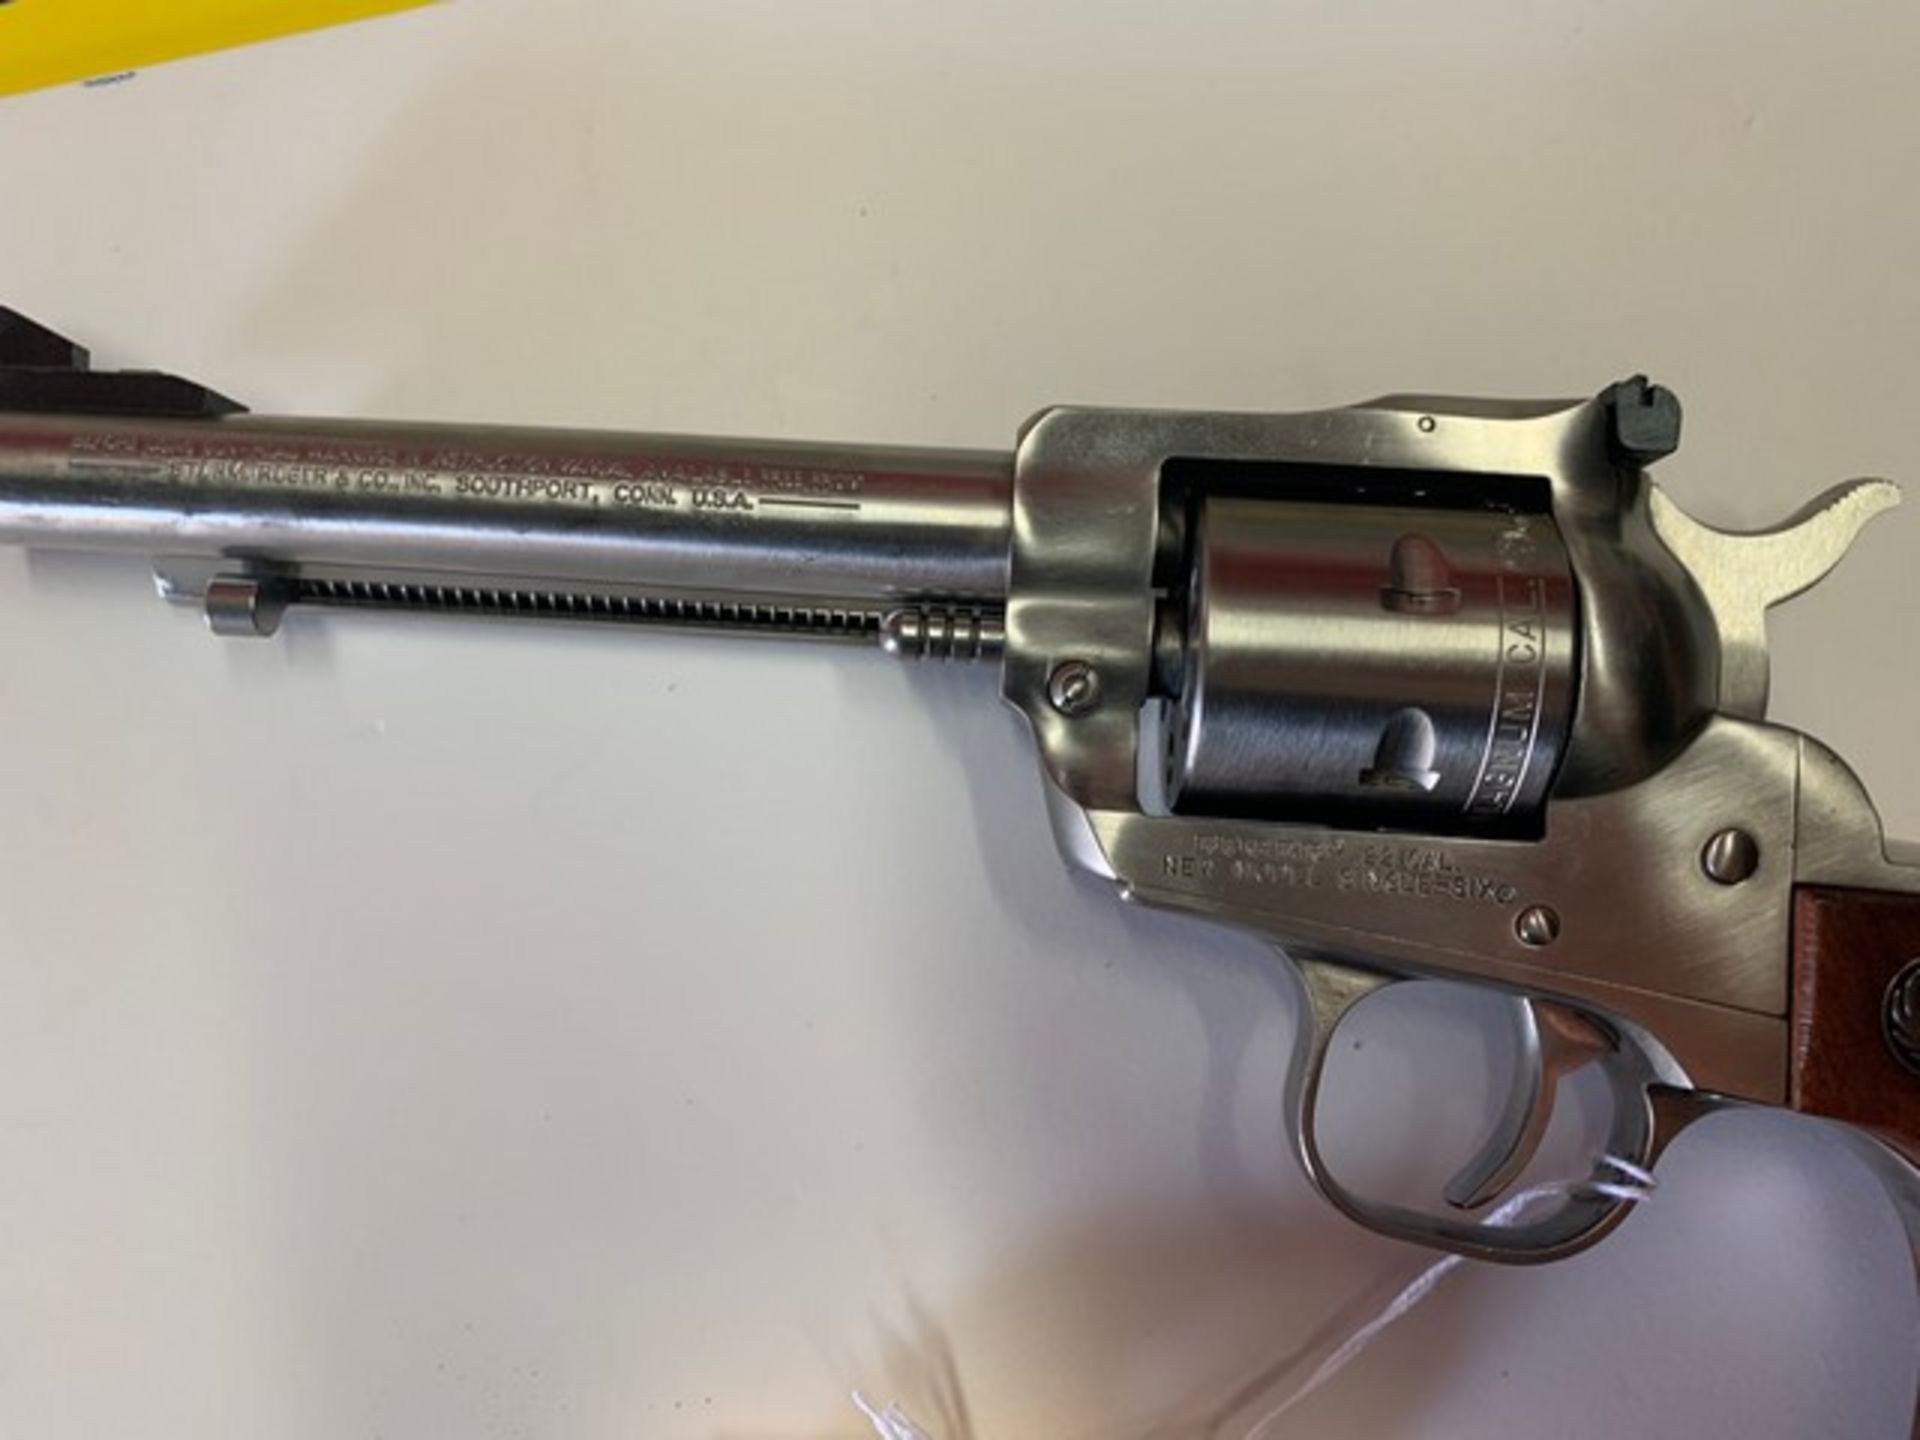 RUGER SINGLE SIX REVOLVER - 22 MAG - SINGLE ACTION - SERIAL No. 26424806 (FOB HOLLYWOOD, FL) - Image 4 of 4